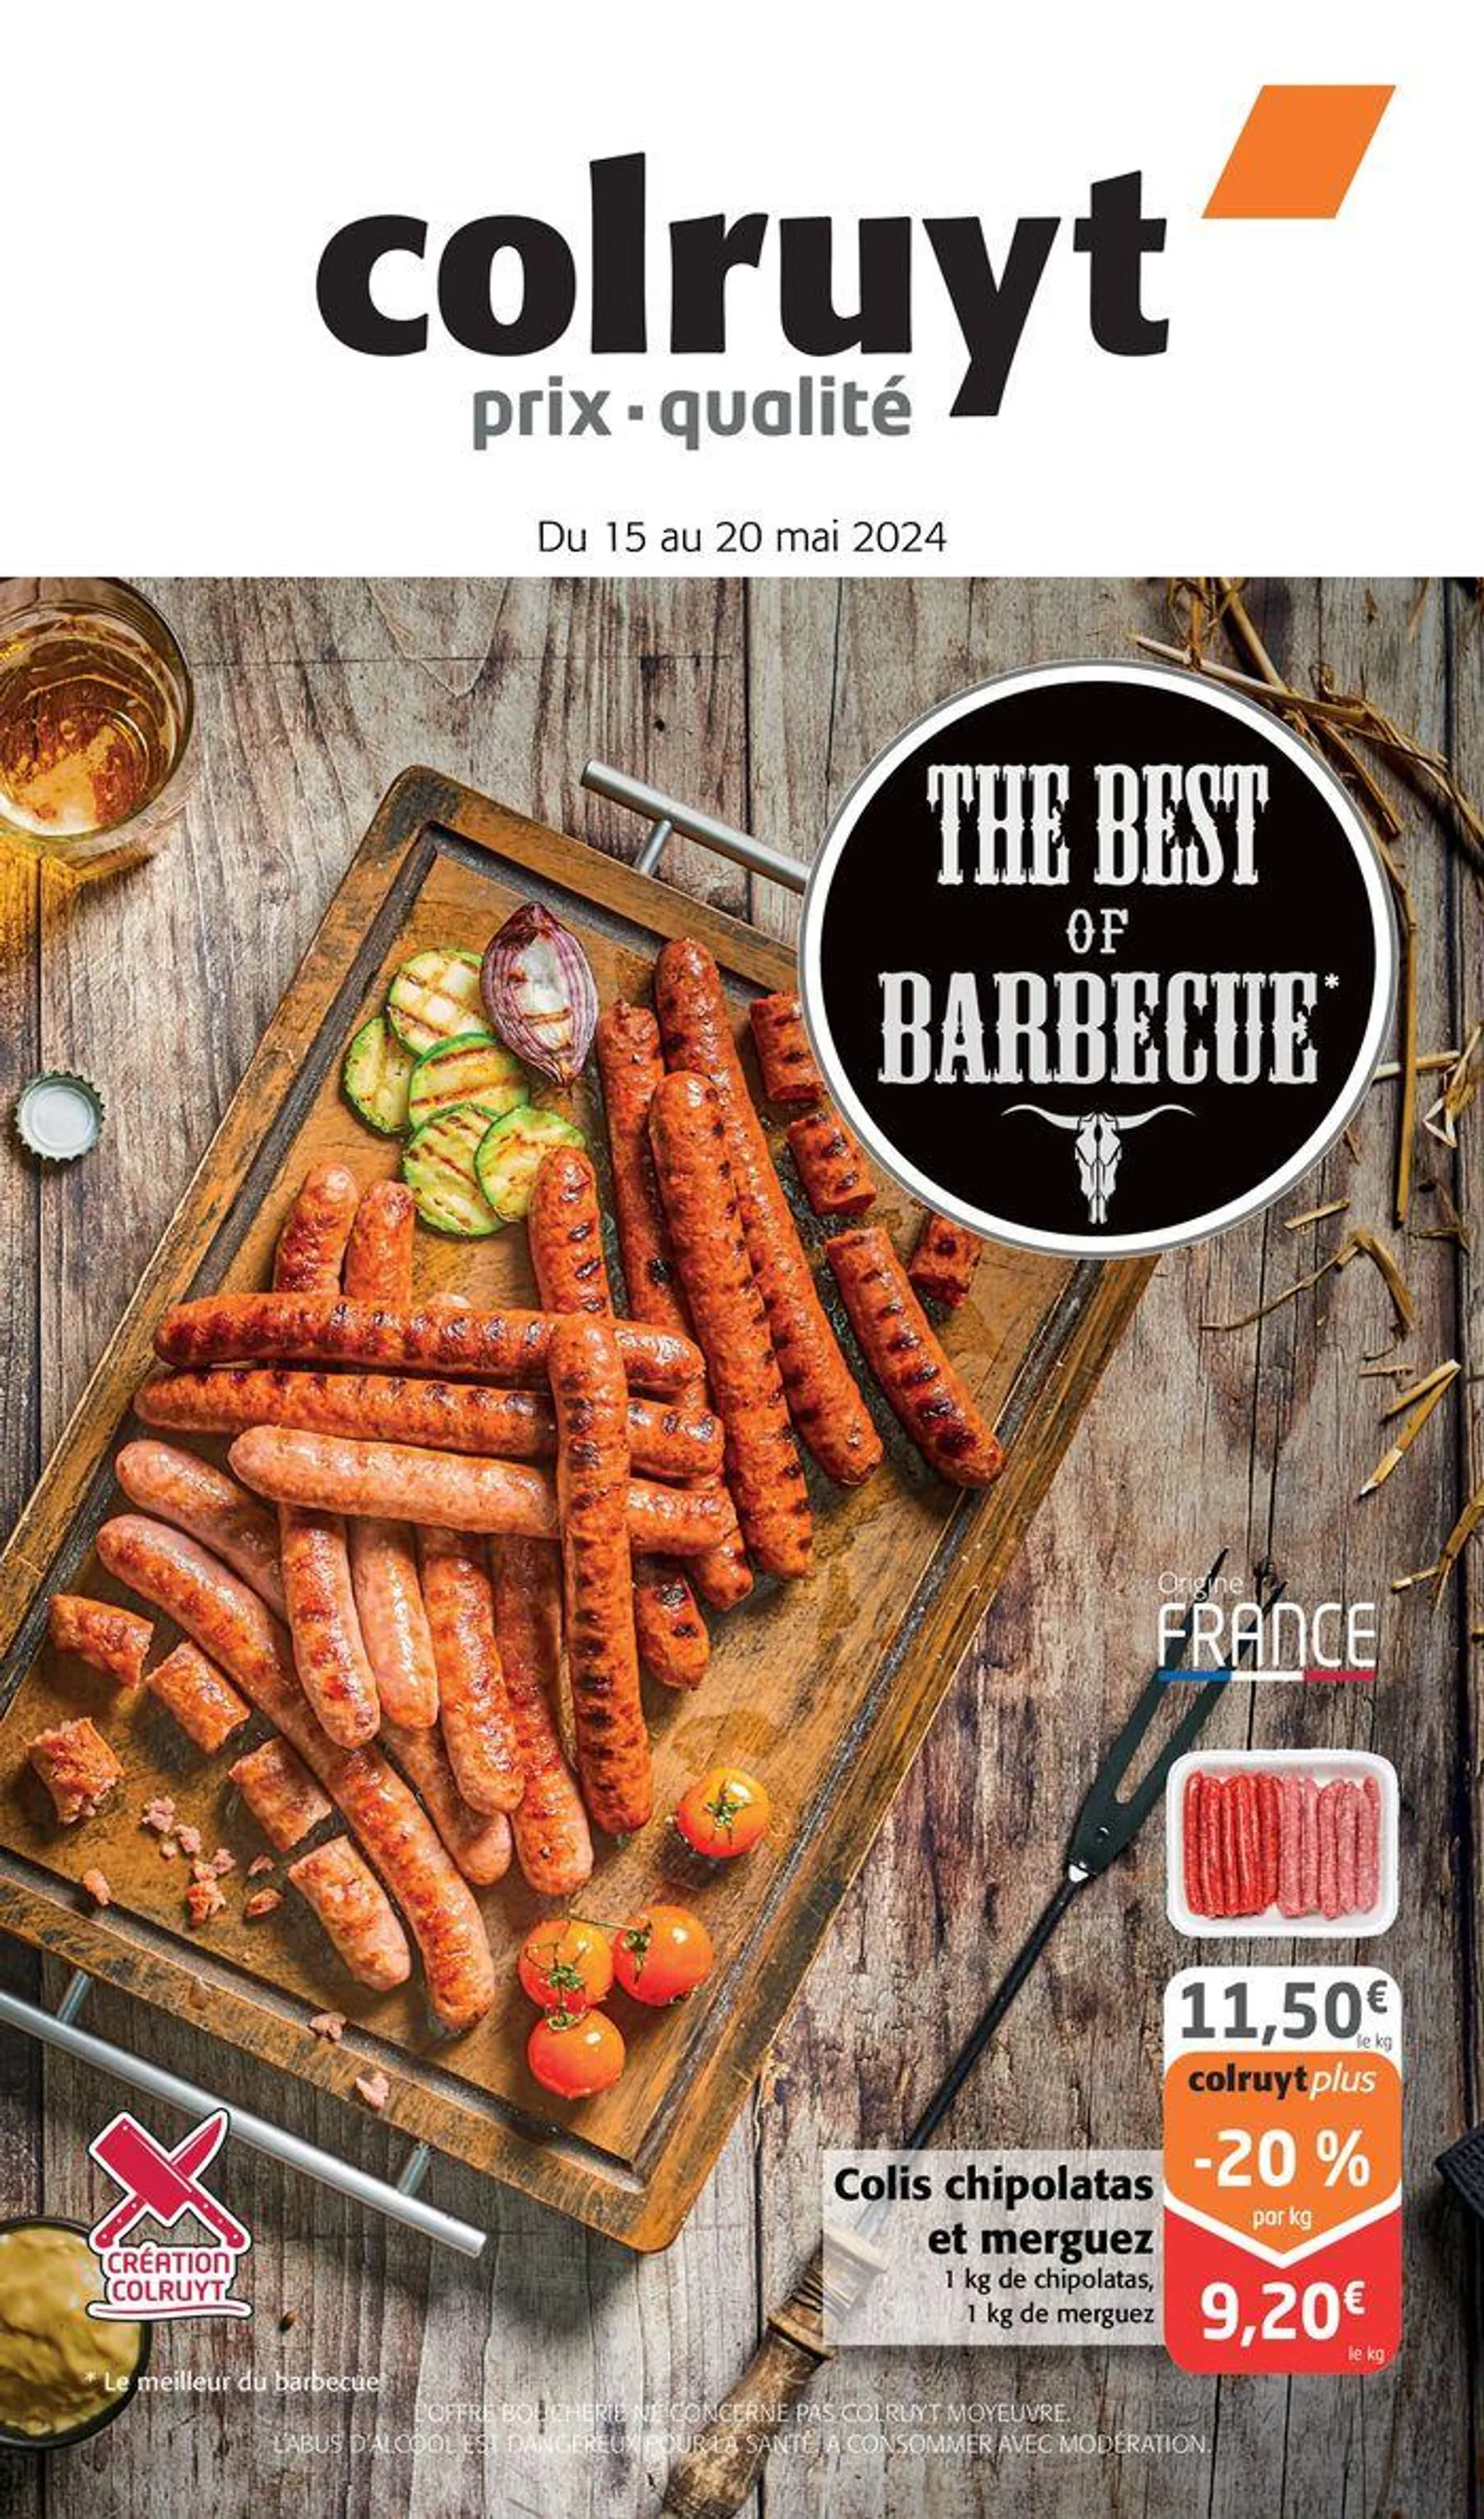 The best of barbecue - 1